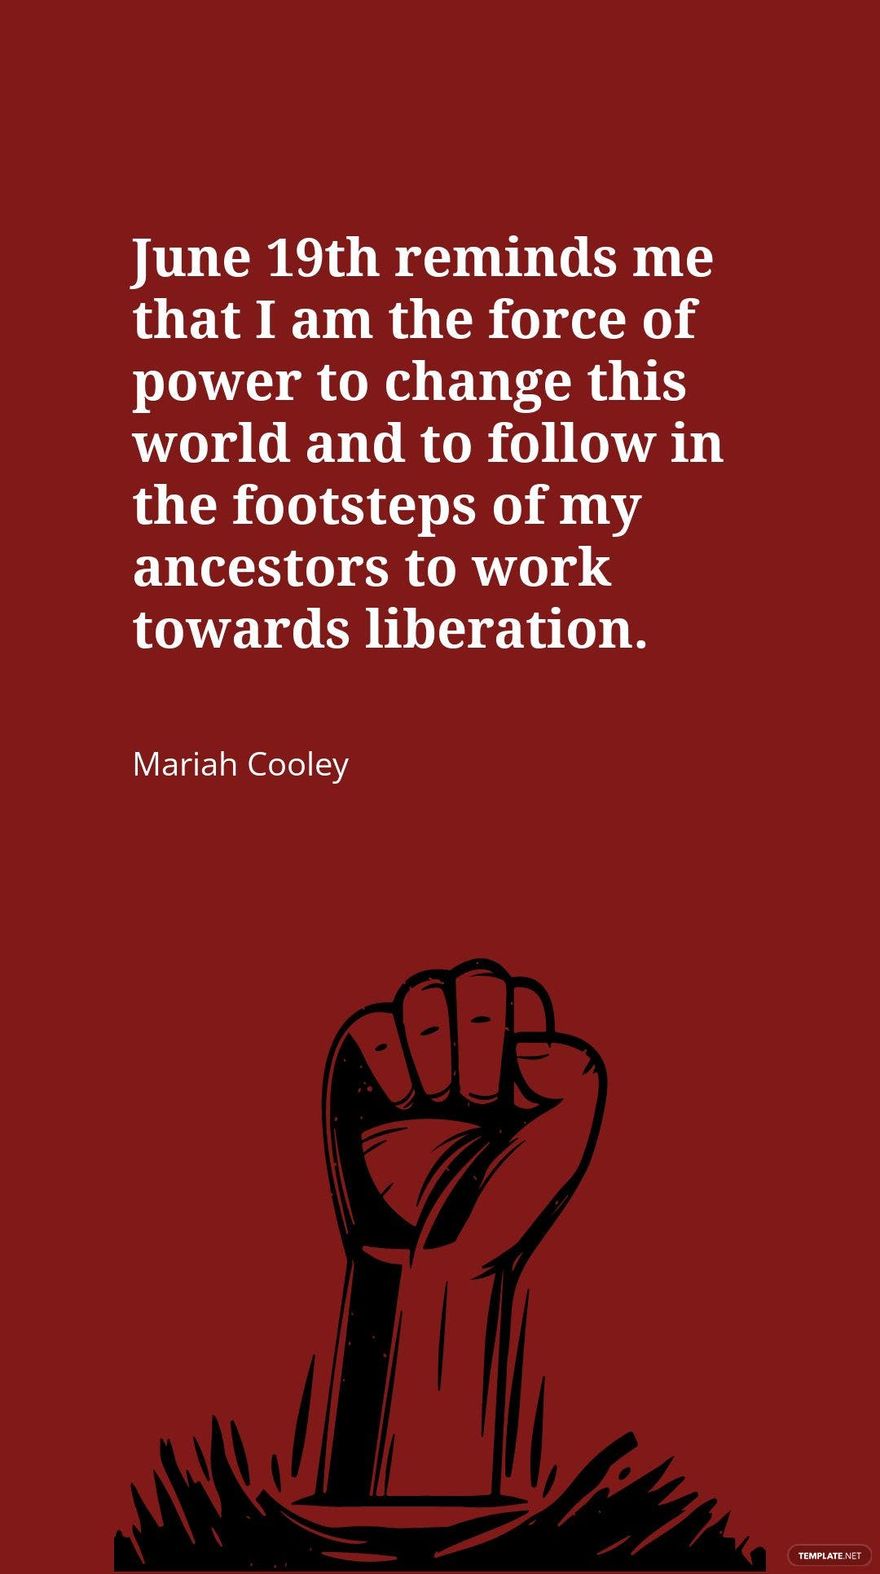 Free Mariah Cooley - June 19th reminds me that I am the force of power to change this world and to follow in the footsteps of my ancestors to work towards liberation.